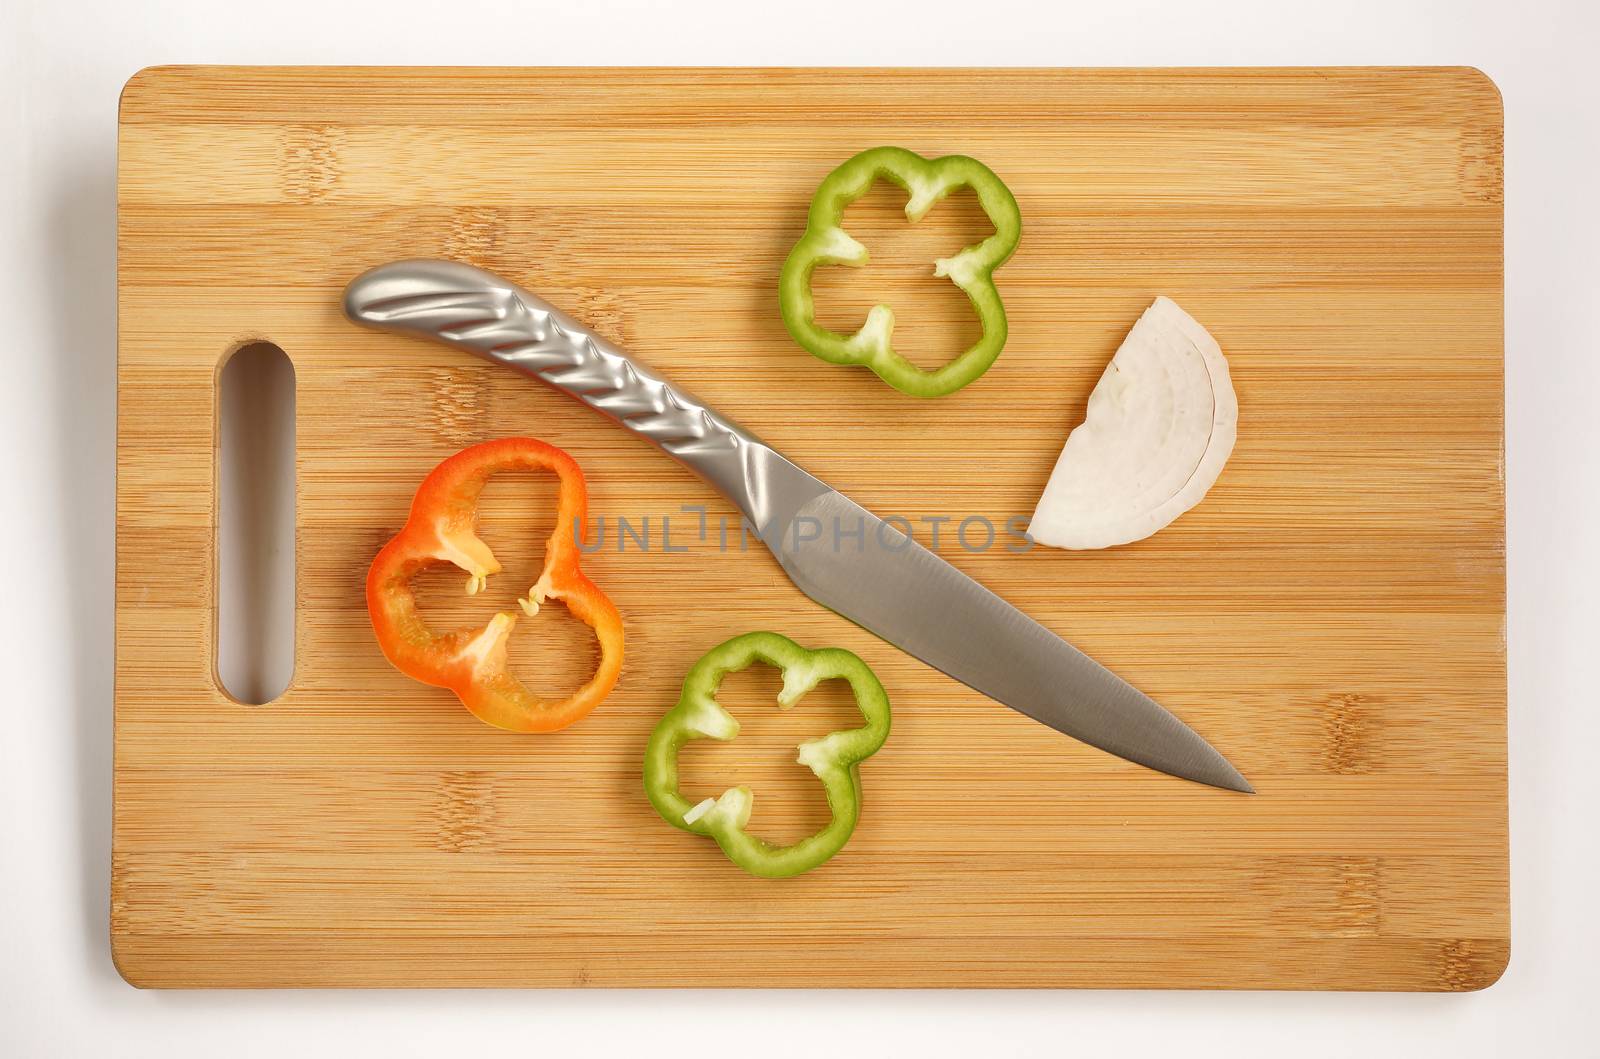 Small utility knife for a jobbing on a chopping board